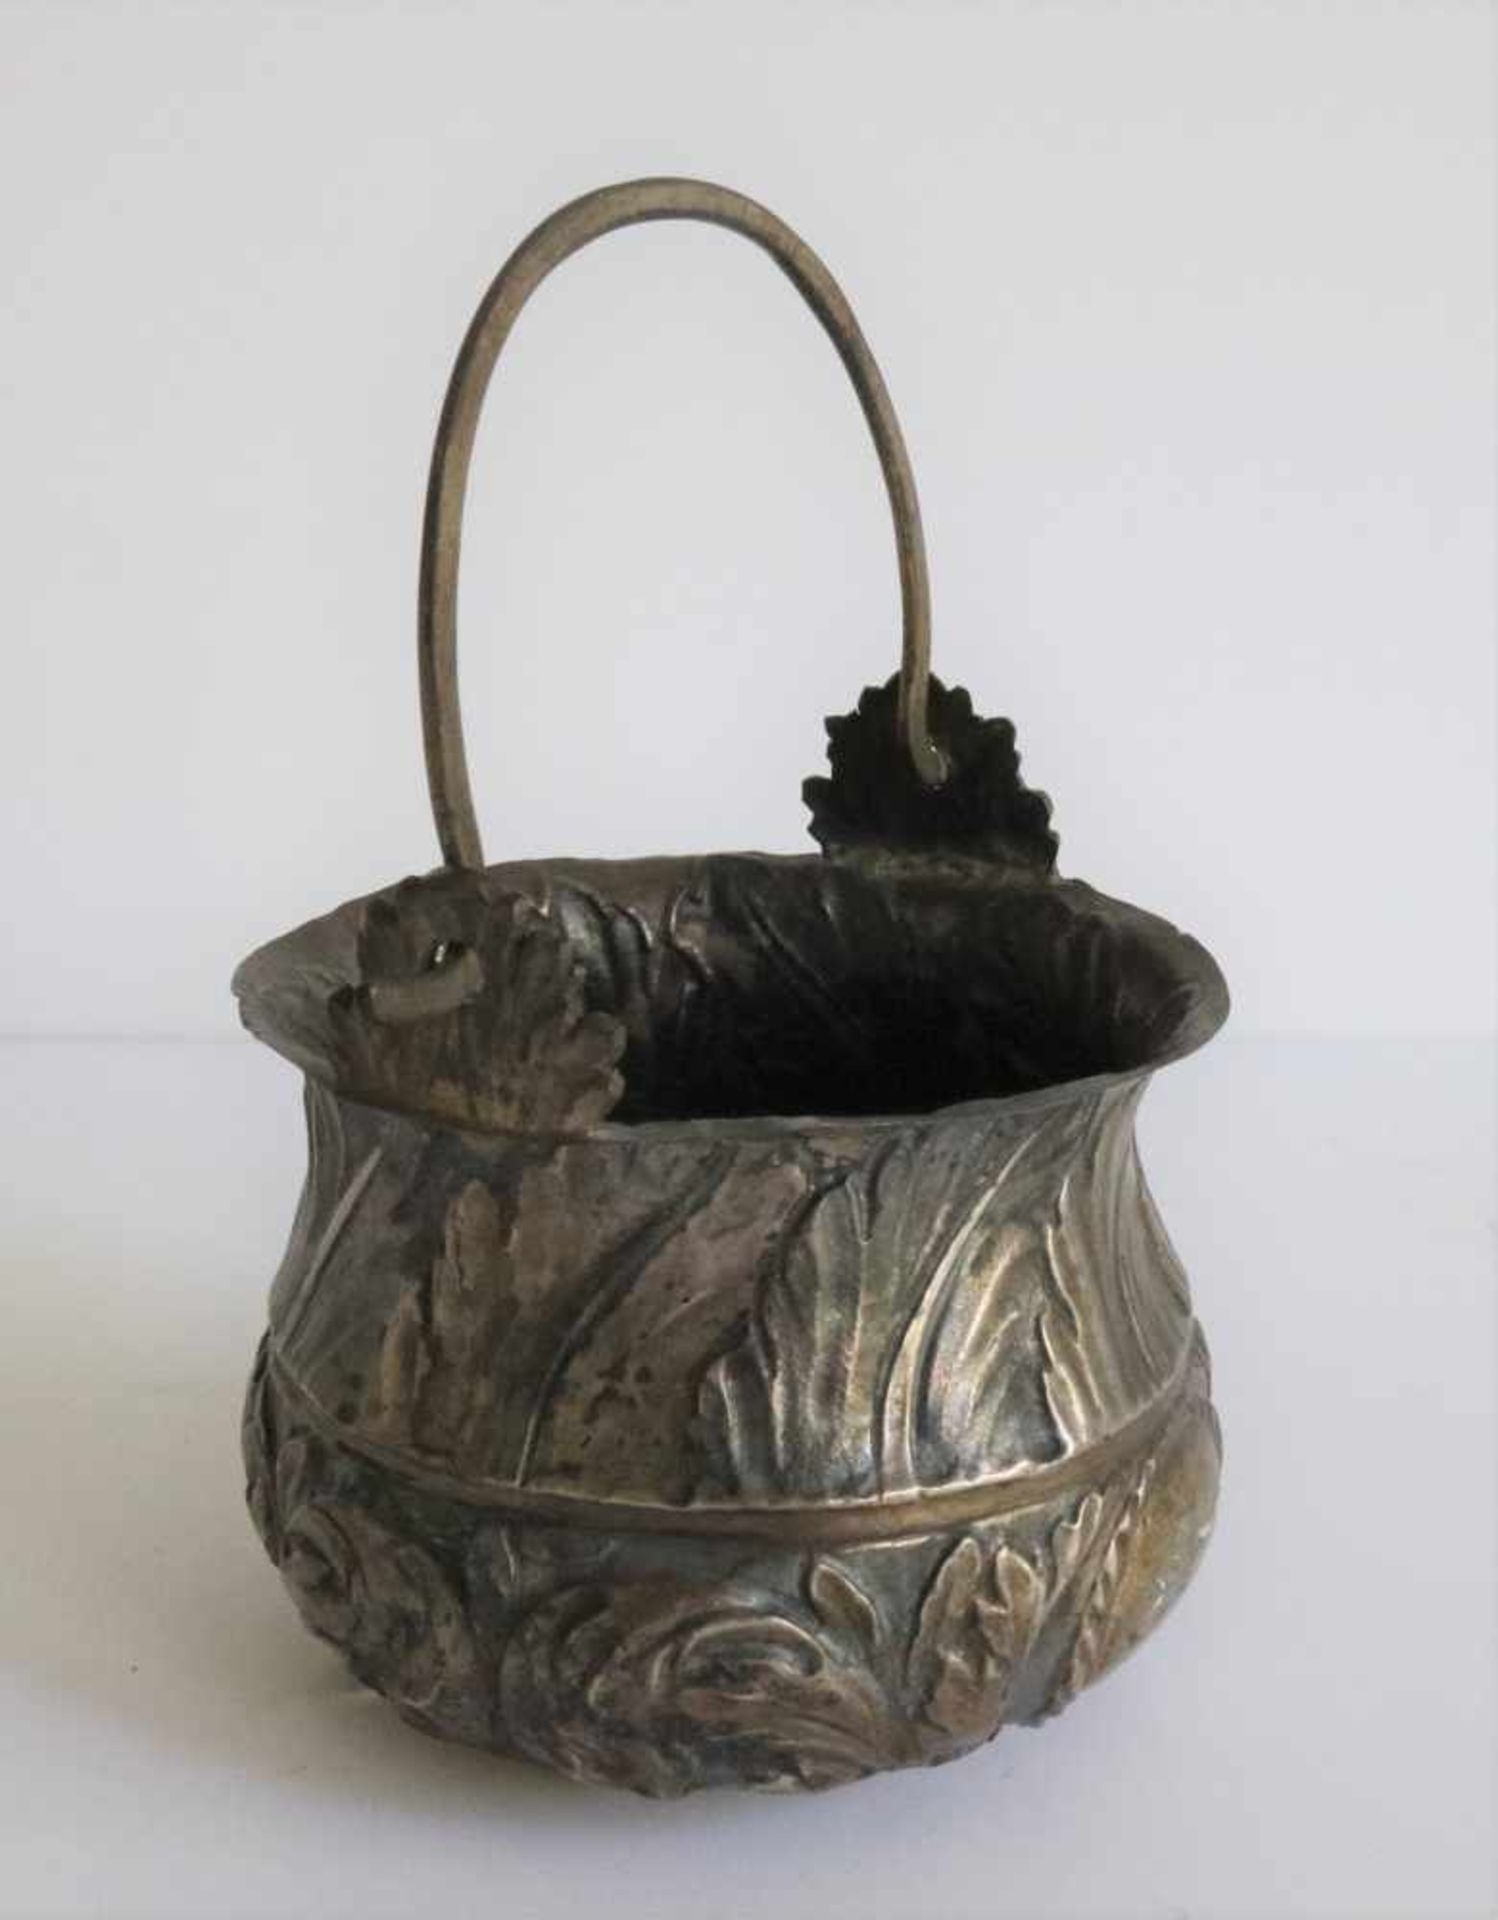 Silver holy water vessel Italy late 18th century H 13 dia 8,5 cm - Image 2 of 4